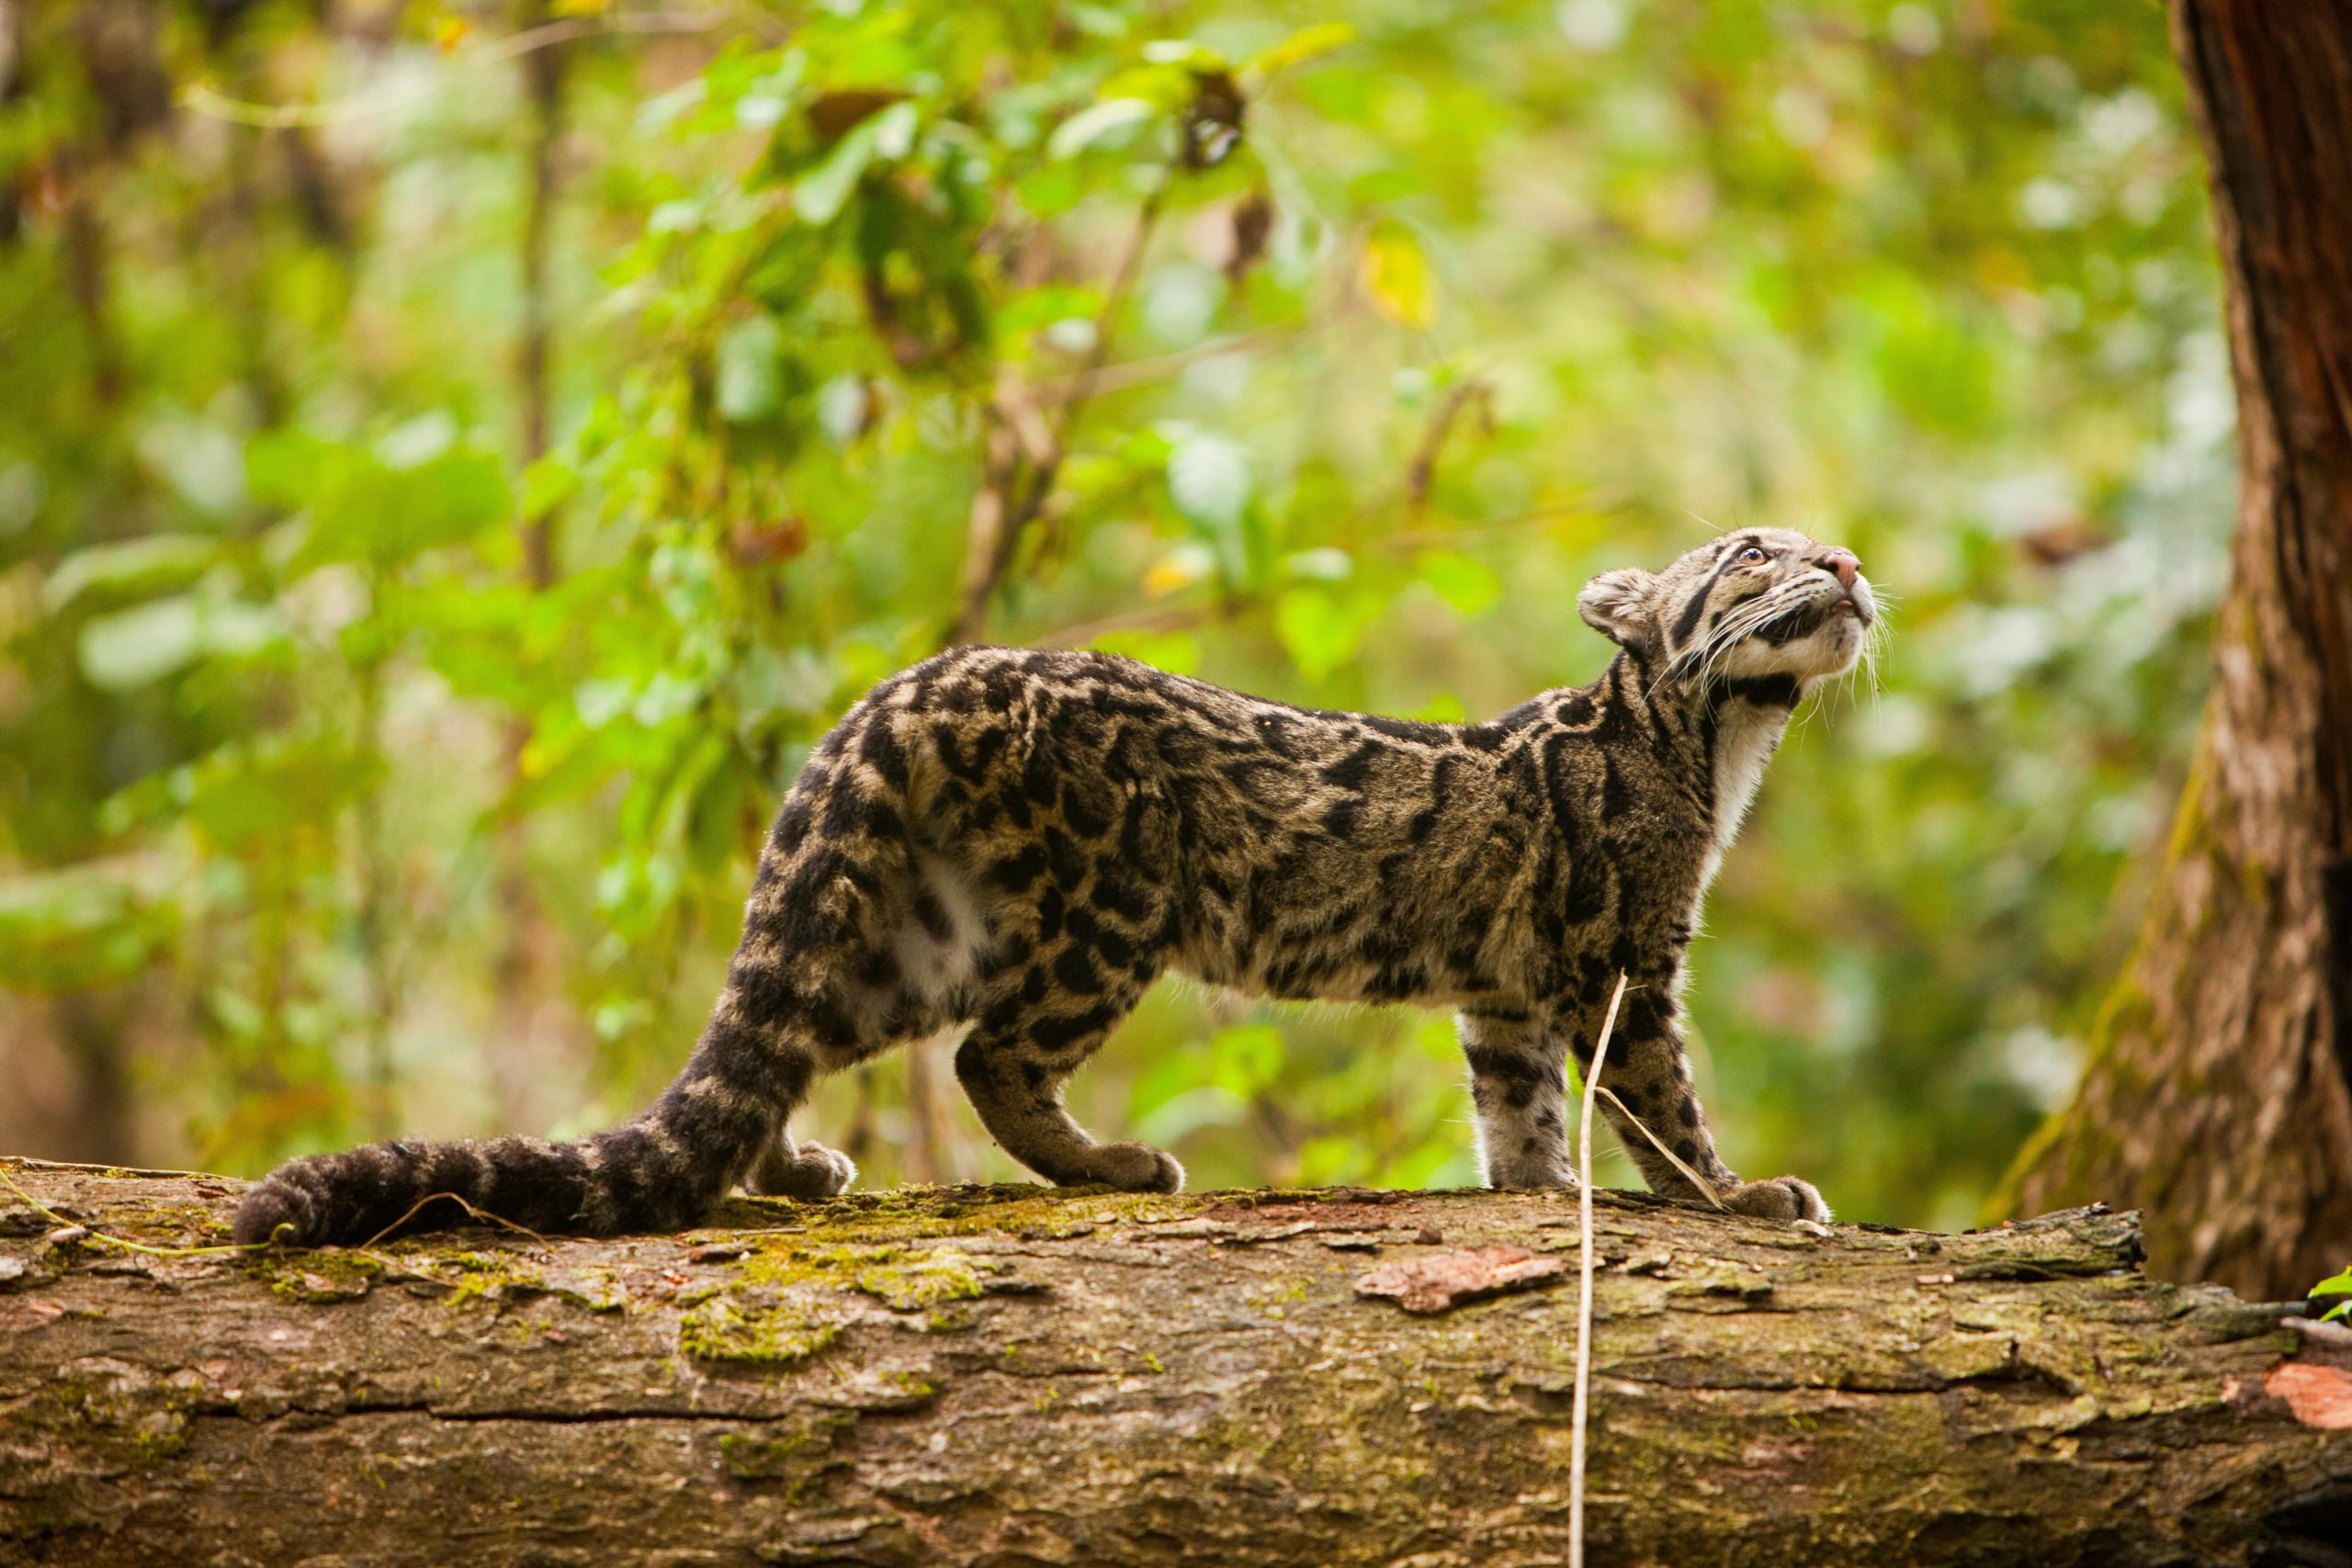 A clouded leopard in Manas National Park, Assam